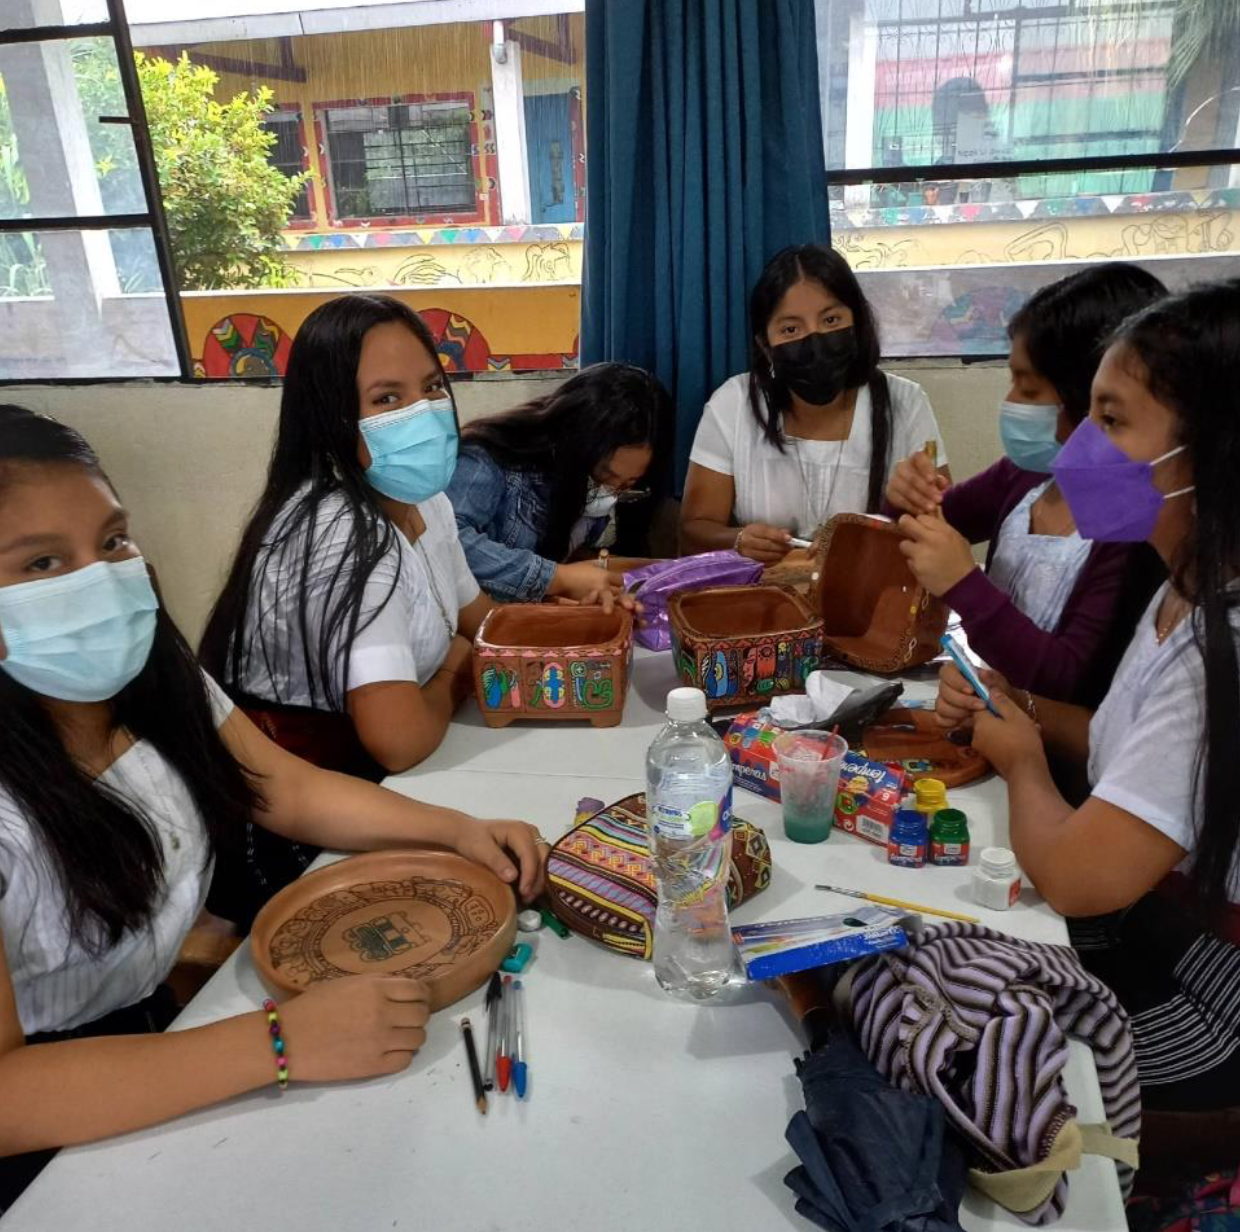 A group of people sitting at a table with masks on

Description automatically generated with low confidence